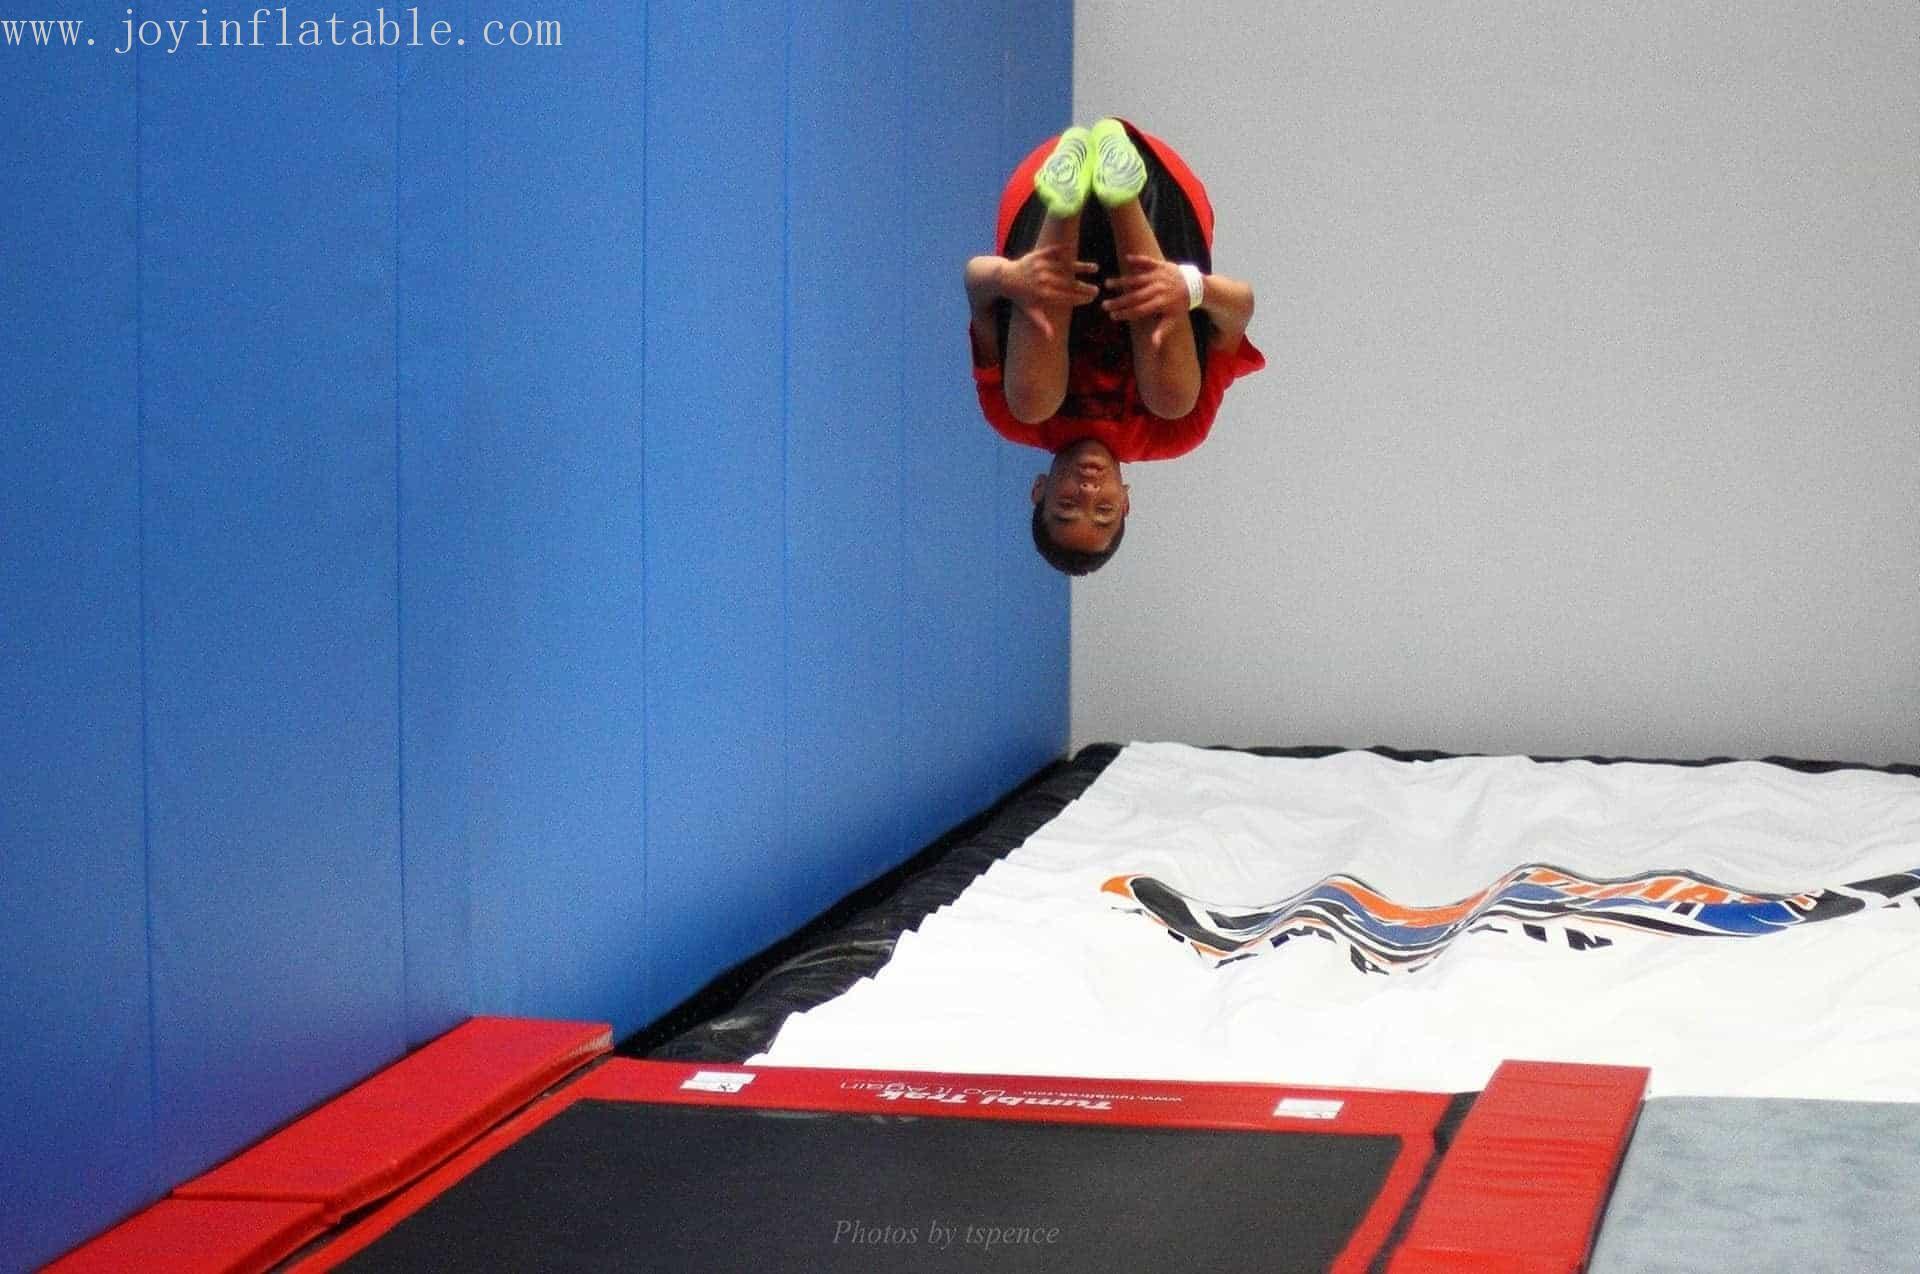 challenge inflatable foam pit gymnastics from China for outdoor